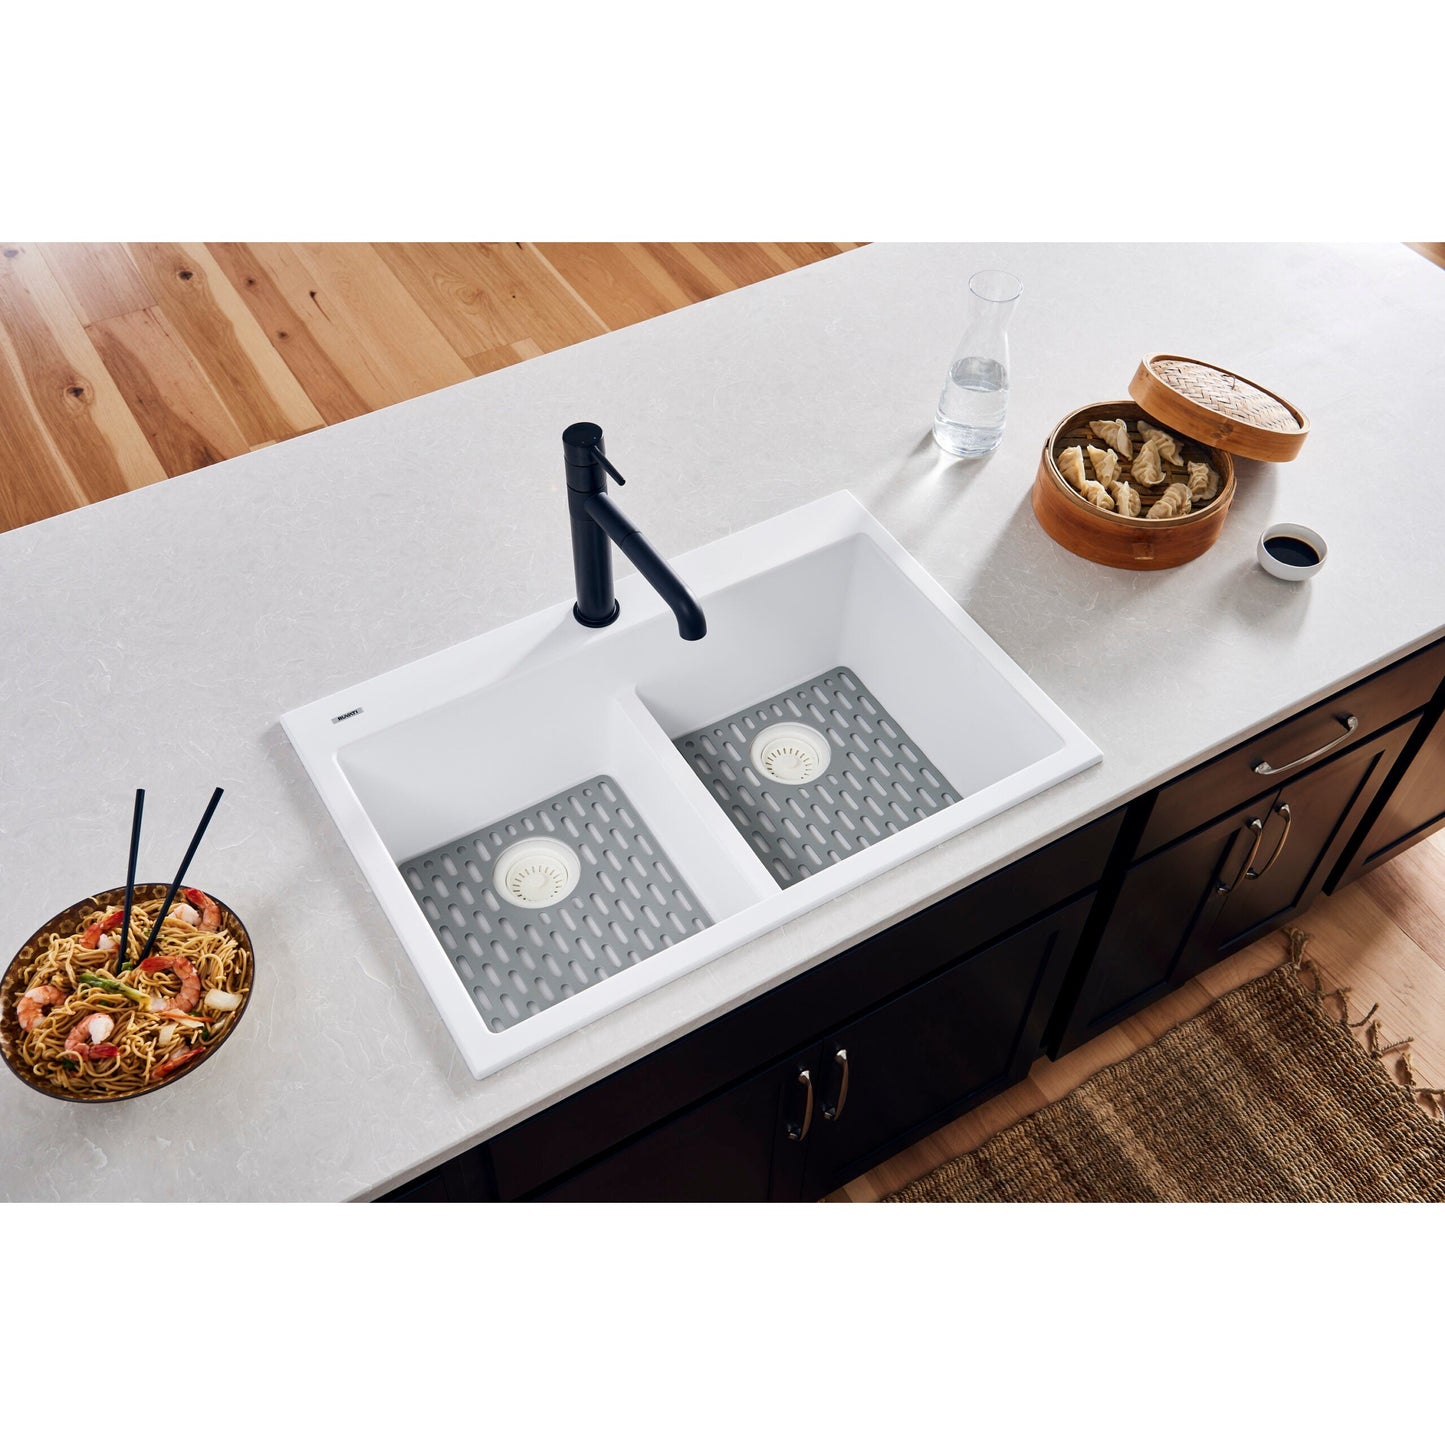 Ruvati epiGranite 33" x 22" Arctic White Drop-In Topmount Granite 50/50 Double Bowl Low Divide Kitchen Sink With Basket Strainer, Bottom Rinse Grid and Drain Assembly